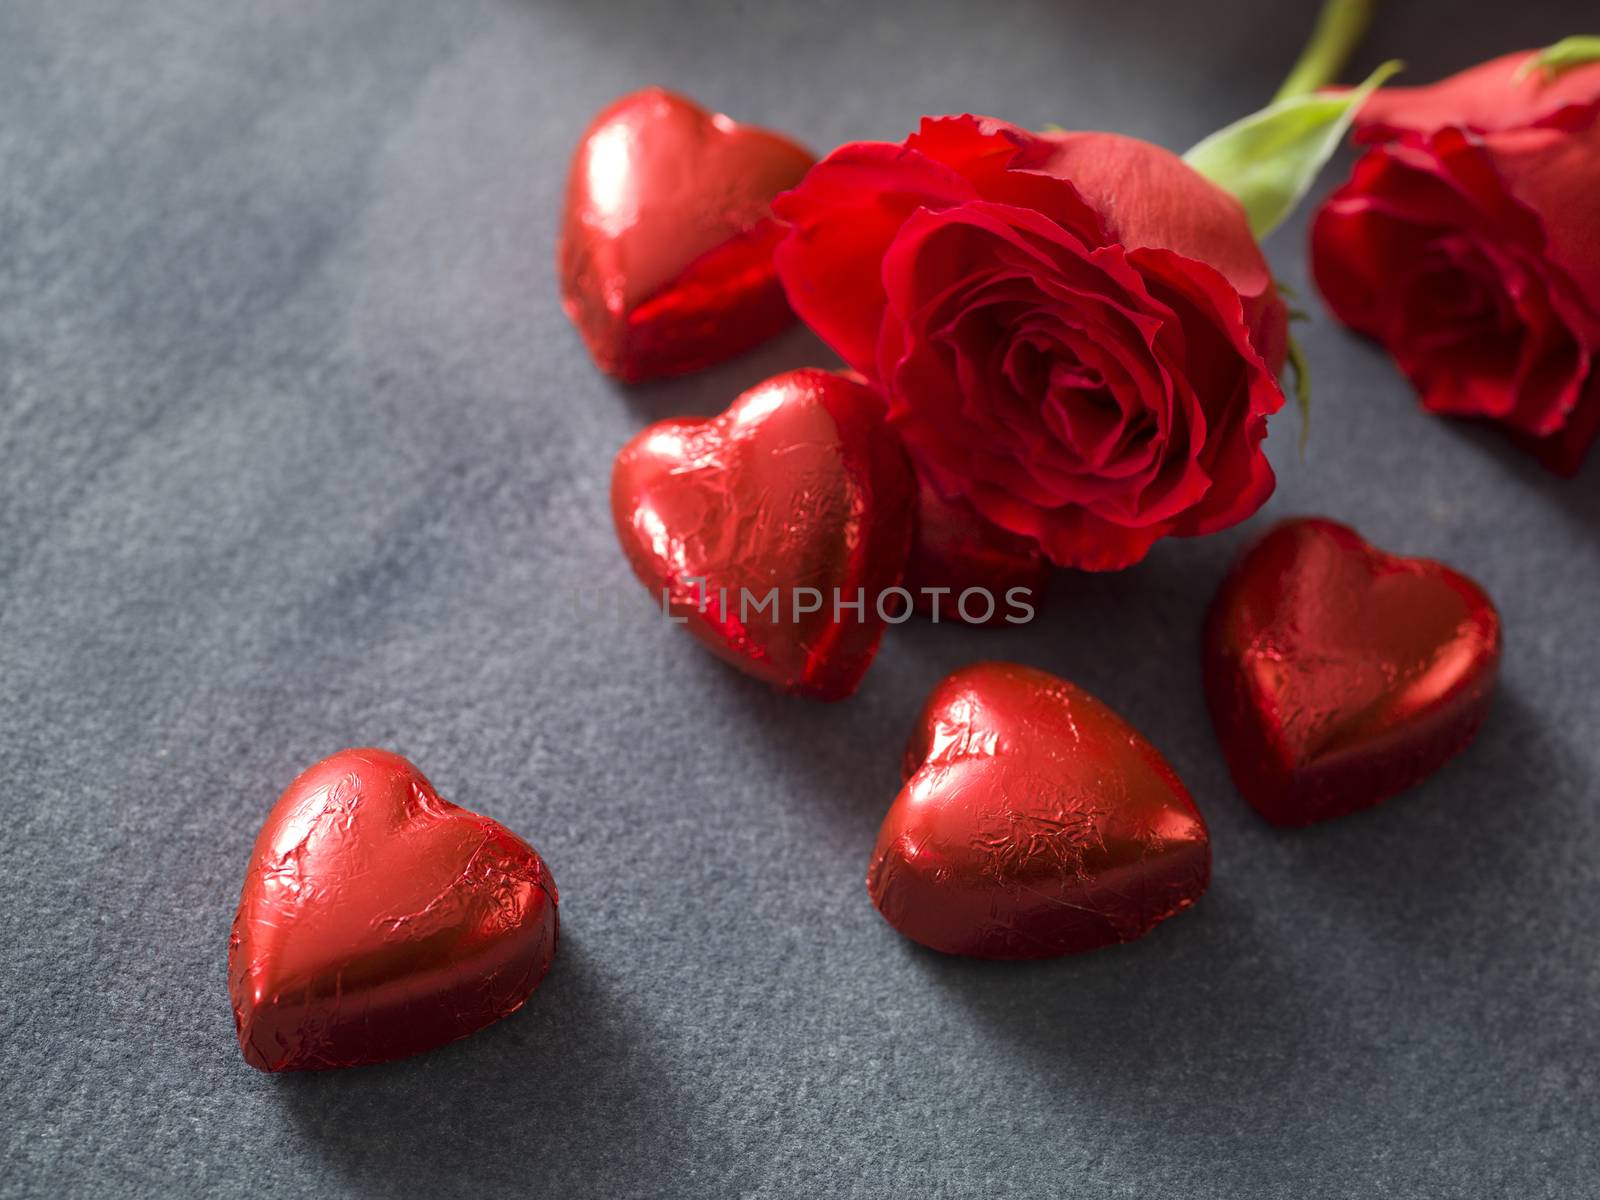 Valentines day background with chocolate hearts and red roses by janssenkruseproductions